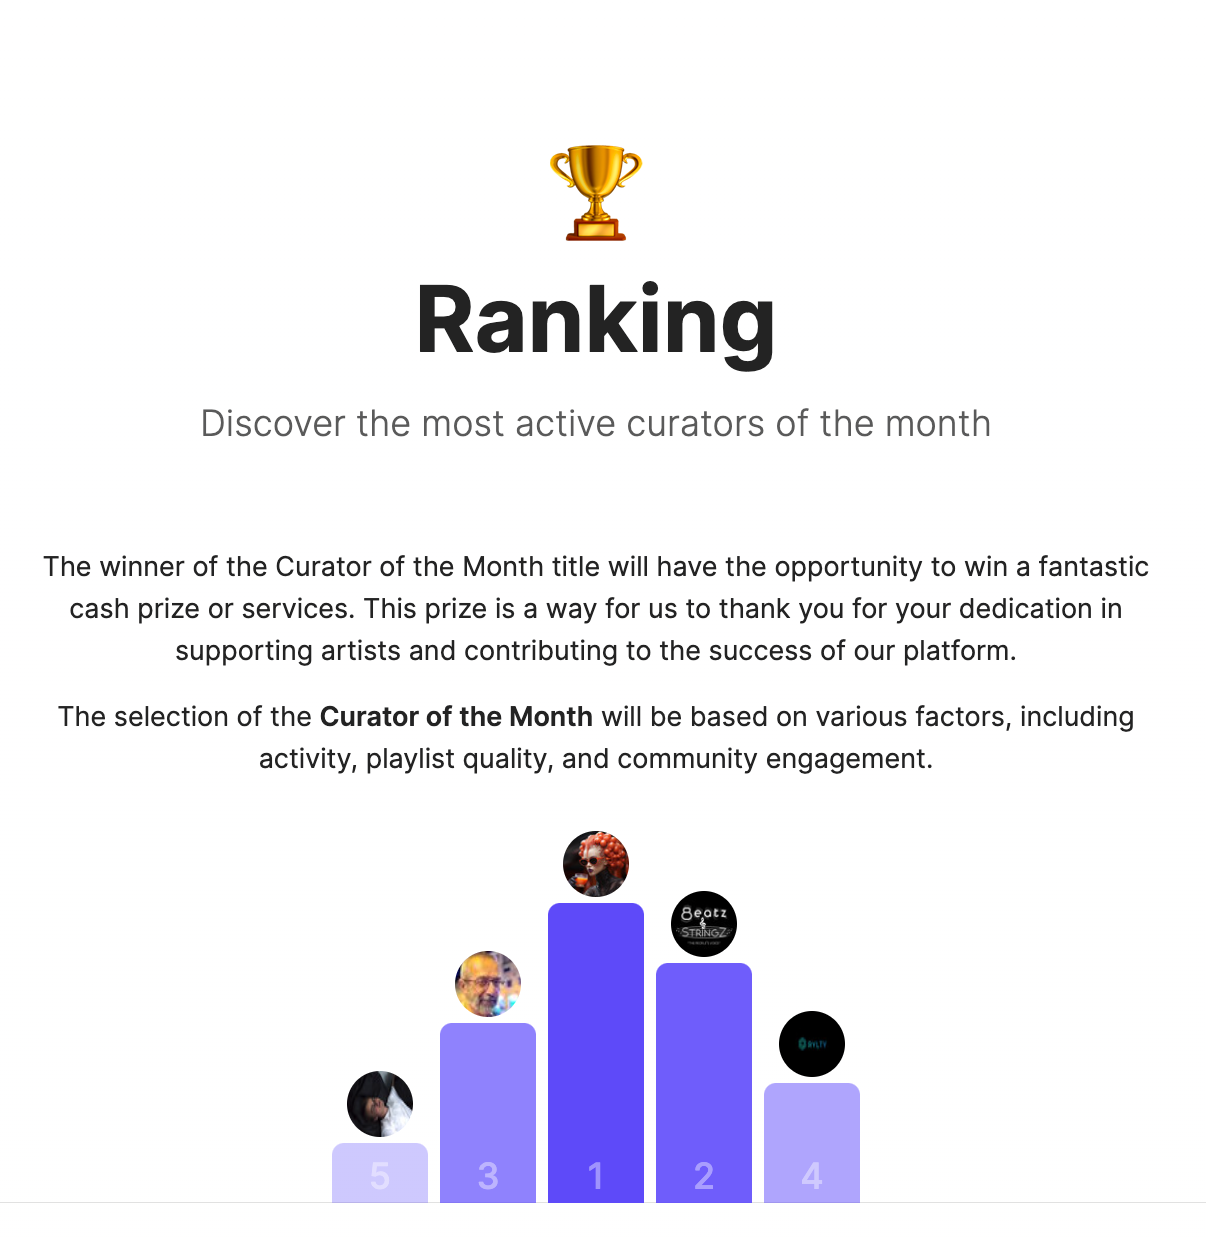 Introducing RANKING and Profile Badges: Discover the most active curators of the month